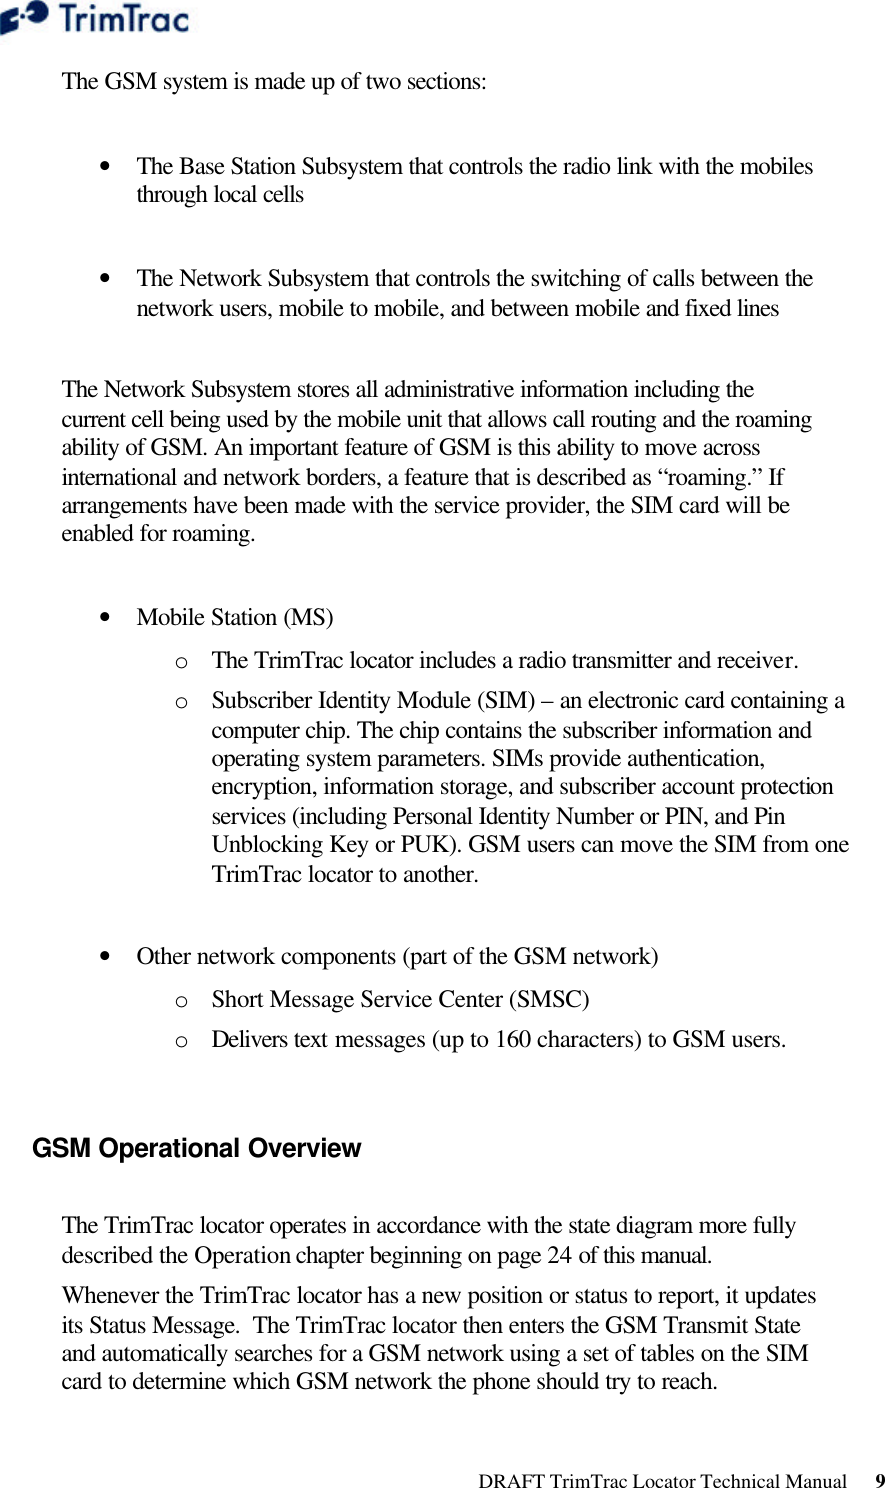  DRAFT TrimTrac Locator Technical Manual      9 The GSM system is made up of two sections:   • The Base Station Subsystem that controls the radio link with the mobiles through local cells   • The Network Subsystem that controls the switching of calls between the network users, mobile to mobile, and between mobile and fixed lines   The Network Subsystem stores all administrative information including the current cell being used by the mobile unit that allows call routing and the roaming ability of GSM. An important feature of GSM is this ability to move across international and network borders, a feature that is described as “roaming.” If arrangements have been made with the service provider, the SIM card will be enabled for roaming.   • Mobile Station (MS)  o The TrimTrac locator includes a radio transmitter and receiver. o Subscriber Identity Module (SIM) – an electronic card containing a computer chip. The chip contains the subscriber information and operating system parameters. SIMs provide authentication, encryption, information storage, and subscriber account protection services (including Personal Identity Number or PIN, and Pin Unblocking Key or PUK). GSM users can move the SIM from one TrimTrac locator to another.   • Other network components (part of the GSM network) o Short Message Service Center (SMSC)  o Delivers text messages (up to 160 characters) to GSM users.  GSM Operational Overview   The TrimTrac locator operates in accordance with the state diagram more fully described the Operation chapter beginning on page 24 of this manual. Whenever the TrimTrac locator has a new position or status to report, it updates its Status Message.  The TrimTrac locator then enters the GSM Transmit State and automatically searches for a GSM network using a set of tables on the SIM card to determine which GSM network the phone should try to reach.  